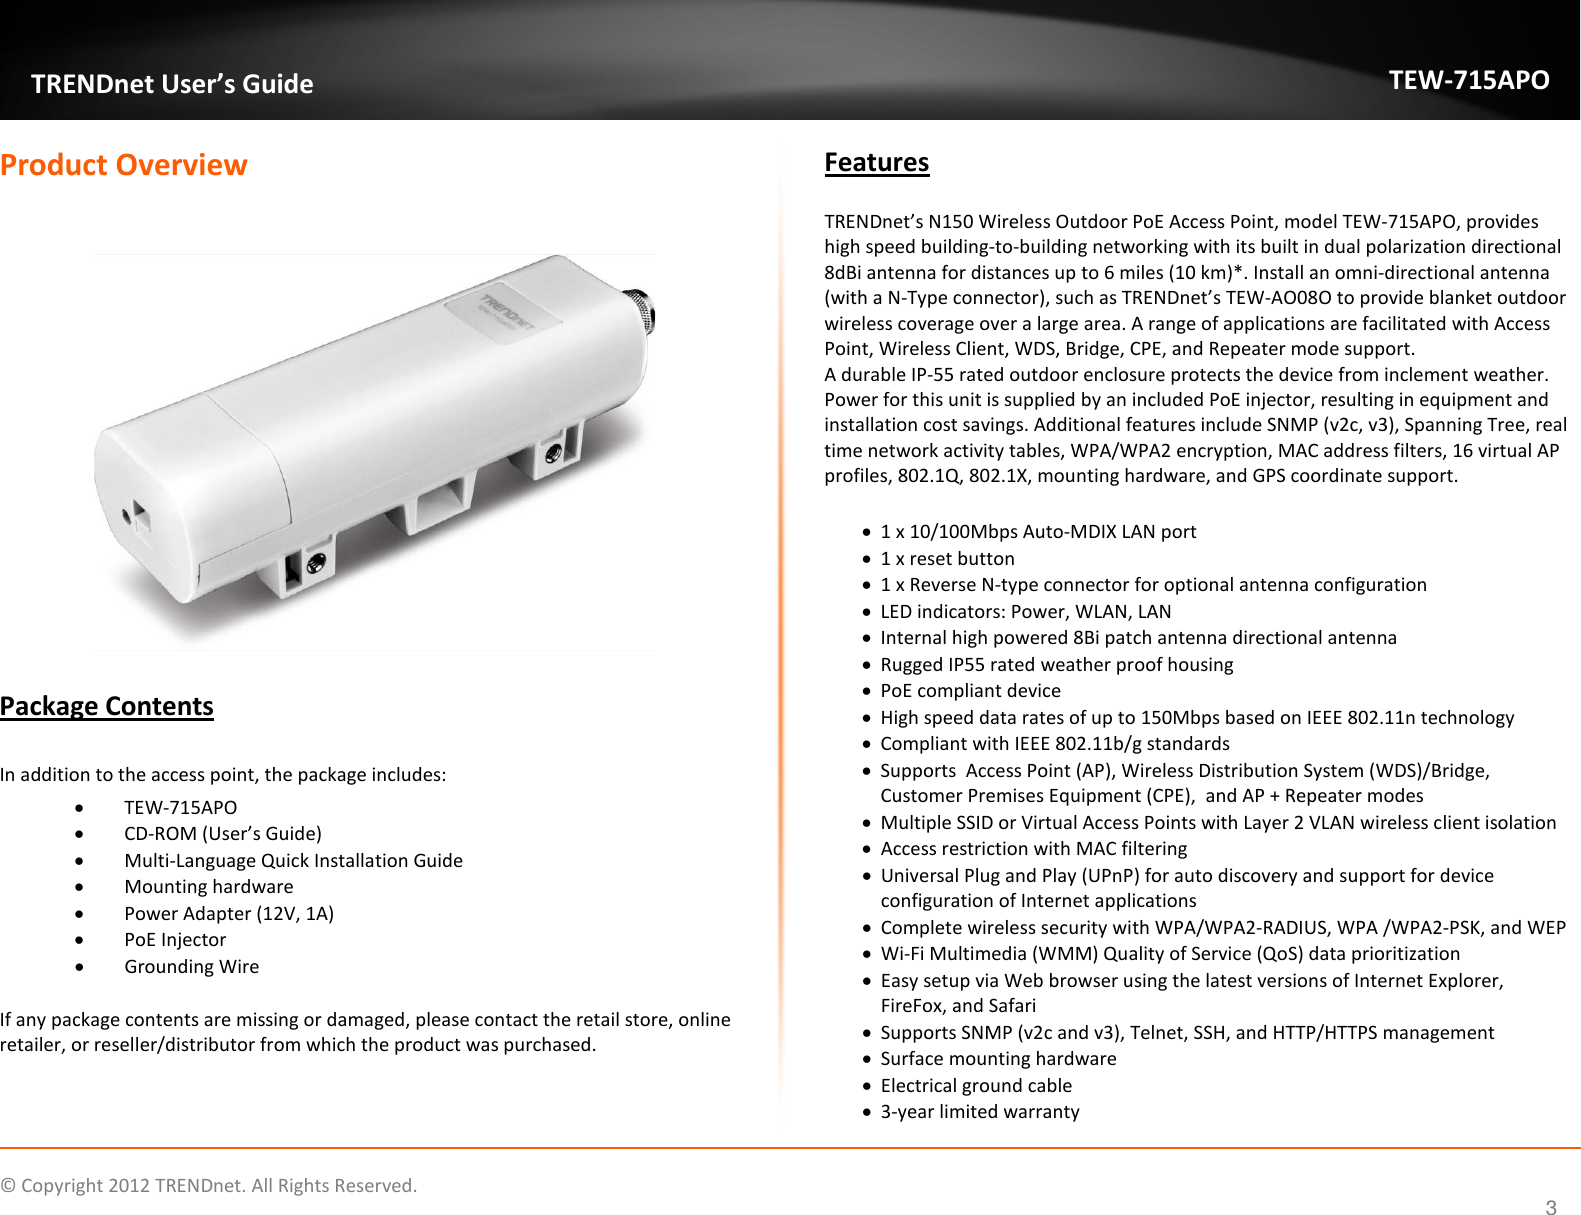                    © Copyright 2012 TRENDnet. All Rights Reserved.      3  TRENDnet User’s Guide TEW-715APO Product Overview     Package Contents  In addition to the access point, the package includes: • TEW-715APO • CD-ROM (User’s Guide) • Multi-Language Quick Installation Guide • Mounting hardware  • Power Adapter (12V, 1A) • PoE Injector • Grounding Wire  If any package contents are missing or damaged, please contact the retail store, online retailer, or reseller/distributor from which the product was purchased. Features  TRENDnet’s N150 Wireless Outdoor PoE Access Point, model TEW-715APO, provides high speed building-to-building networking with its built in dual polarization directional 8dBi antenna for distances up to 6 miles (10 km)*. Install an omni-directional antenna (with a N-Type connector), such as TRENDnet’s TEW-AO08O to provide blanket outdoor wireless coverage over a large area. A range of applications are facilitated with Access Point, Wireless Client, WDS, Bridge, CPE, and Repeater mode support.  A durable IP-55 rated outdoor enclosure protects the device from inclement weather. Power for this unit is supplied by an included PoE injector, resulting in equipment and installation cost savings. Additional features include SNMP (v2c, v3), Spanning Tree, real time network activity tables, WPA/WPA2 encryption, MAC address filters, 16 virtual AP profiles, 802.1Q, 802.1X, mounting hardware, and GPS coordinate support.  • 1 x 10/100Mbps Auto-MDIX LAN port • 1 x reset button • 1 x Reverse N-type connector for optional antenna configuration • LED indicators: Power, WLAN, LAN • Internal high powered 8Bi patch antenna directional antenna • Rugged IP55 rated weather proof housing • PoE compliant device • High speed data rates of up to 150Mbps based on IEEE 802.11n technology • Compliant with IEEE 802.11b/g standards • Supports  Access Point (AP), Wireless Distribution System (WDS)/Bridge, Customer Premises Equipment (CPE),  and AP + Repeater modes • Multiple SSID or Virtual Access Points with Layer 2 VLAN wireless client isolation • Access restriction with MAC filtering  • Universal Plug and Play (UPnP) for auto discovery and support for device configuration of Internet applications • Complete wireless security with WPA/WPA2-RADIUS, WPA /WPA2-PSK, and WEP  • Wi-Fi Multimedia (WMM) Quality of Service (QoS) data prioritization • Easy setup via Web browser using the latest versions of Internet Explorer, FireFox, and Safari • Supports SNMP (v2c and v3), Telnet, SSH, and HTTP/HTTPS management  • Surface mounting hardware  • Electrical ground cable • 3-year limited warranty 